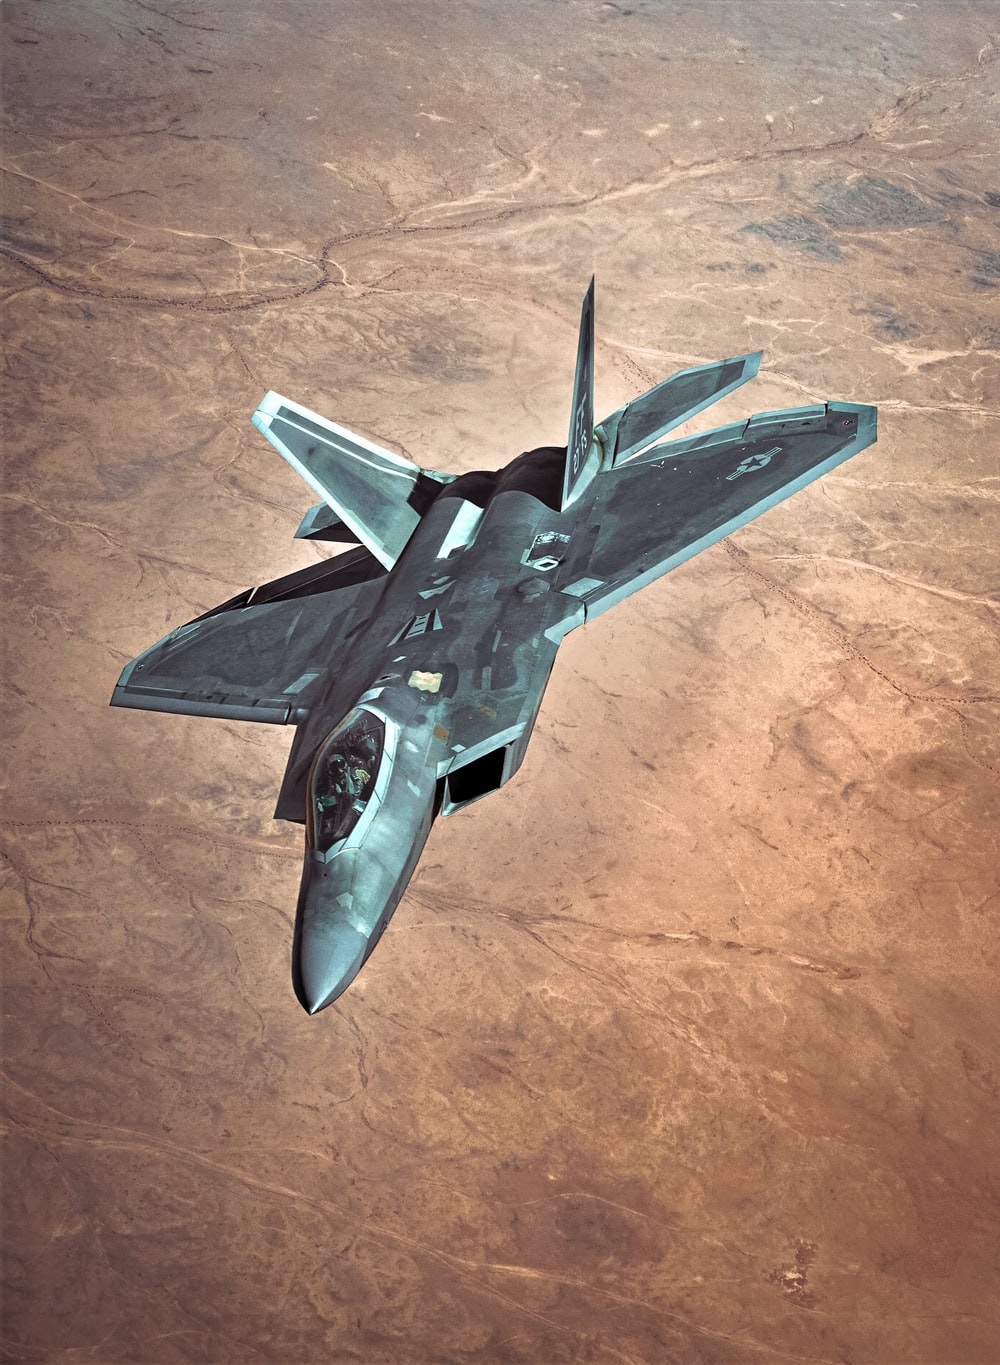 Fighter Jet Picture. Download Free Image